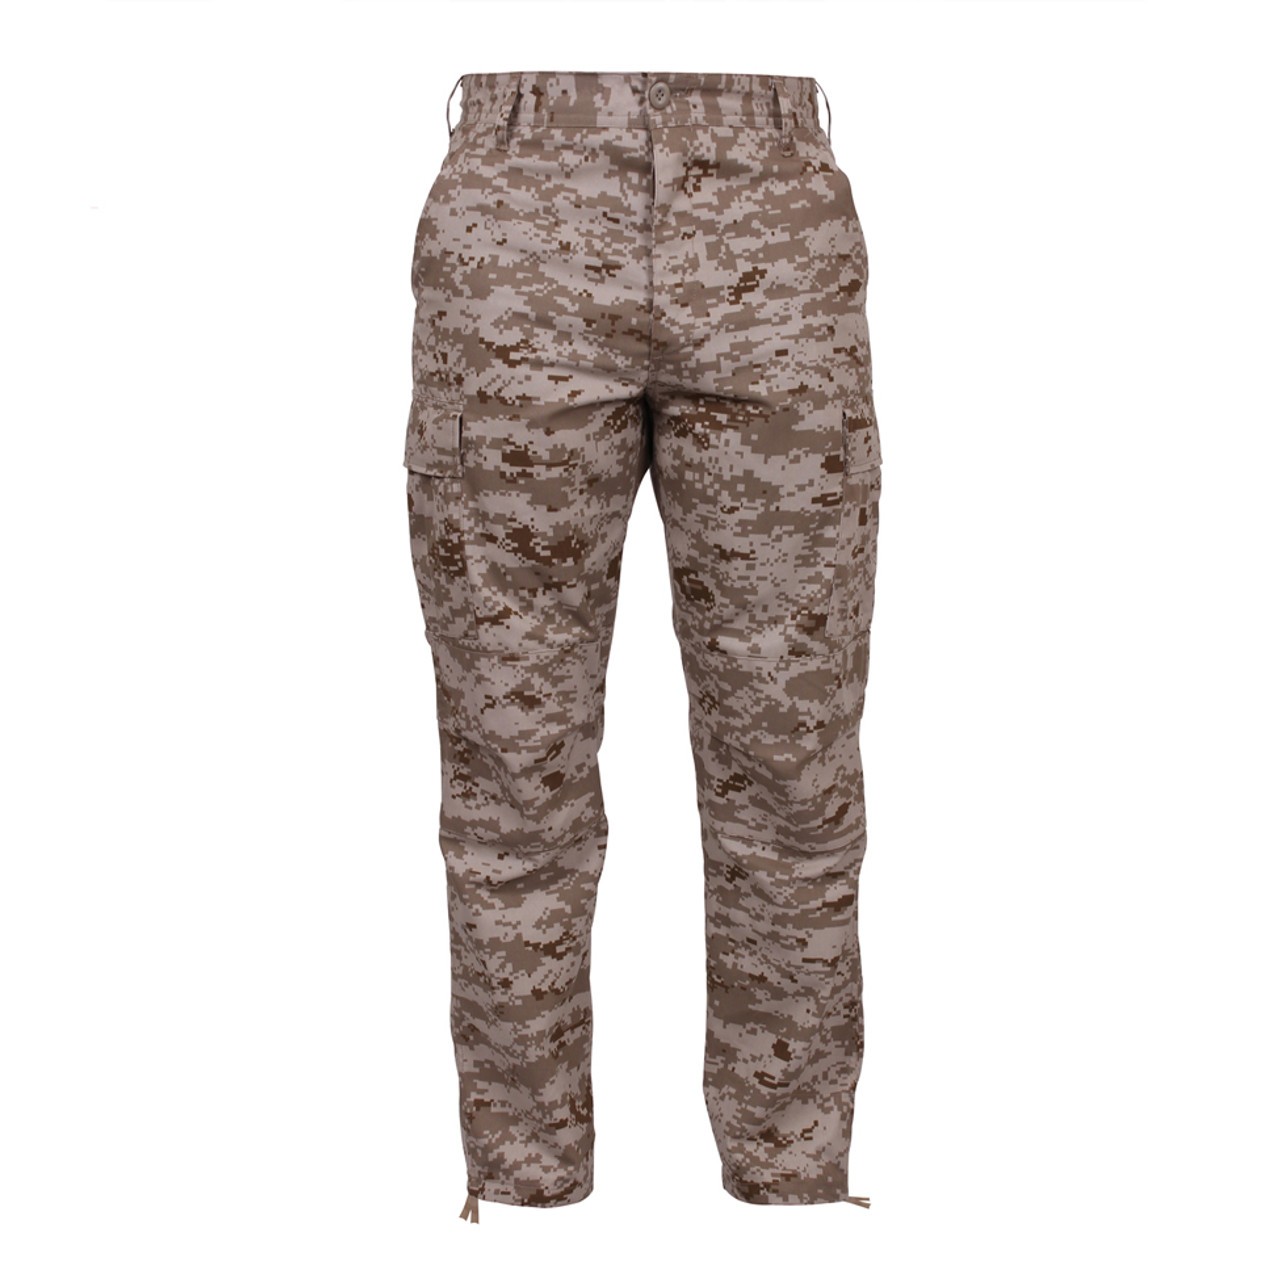 Rothco Digital Camo Tactical BDU Pants - Army Supply Store Military